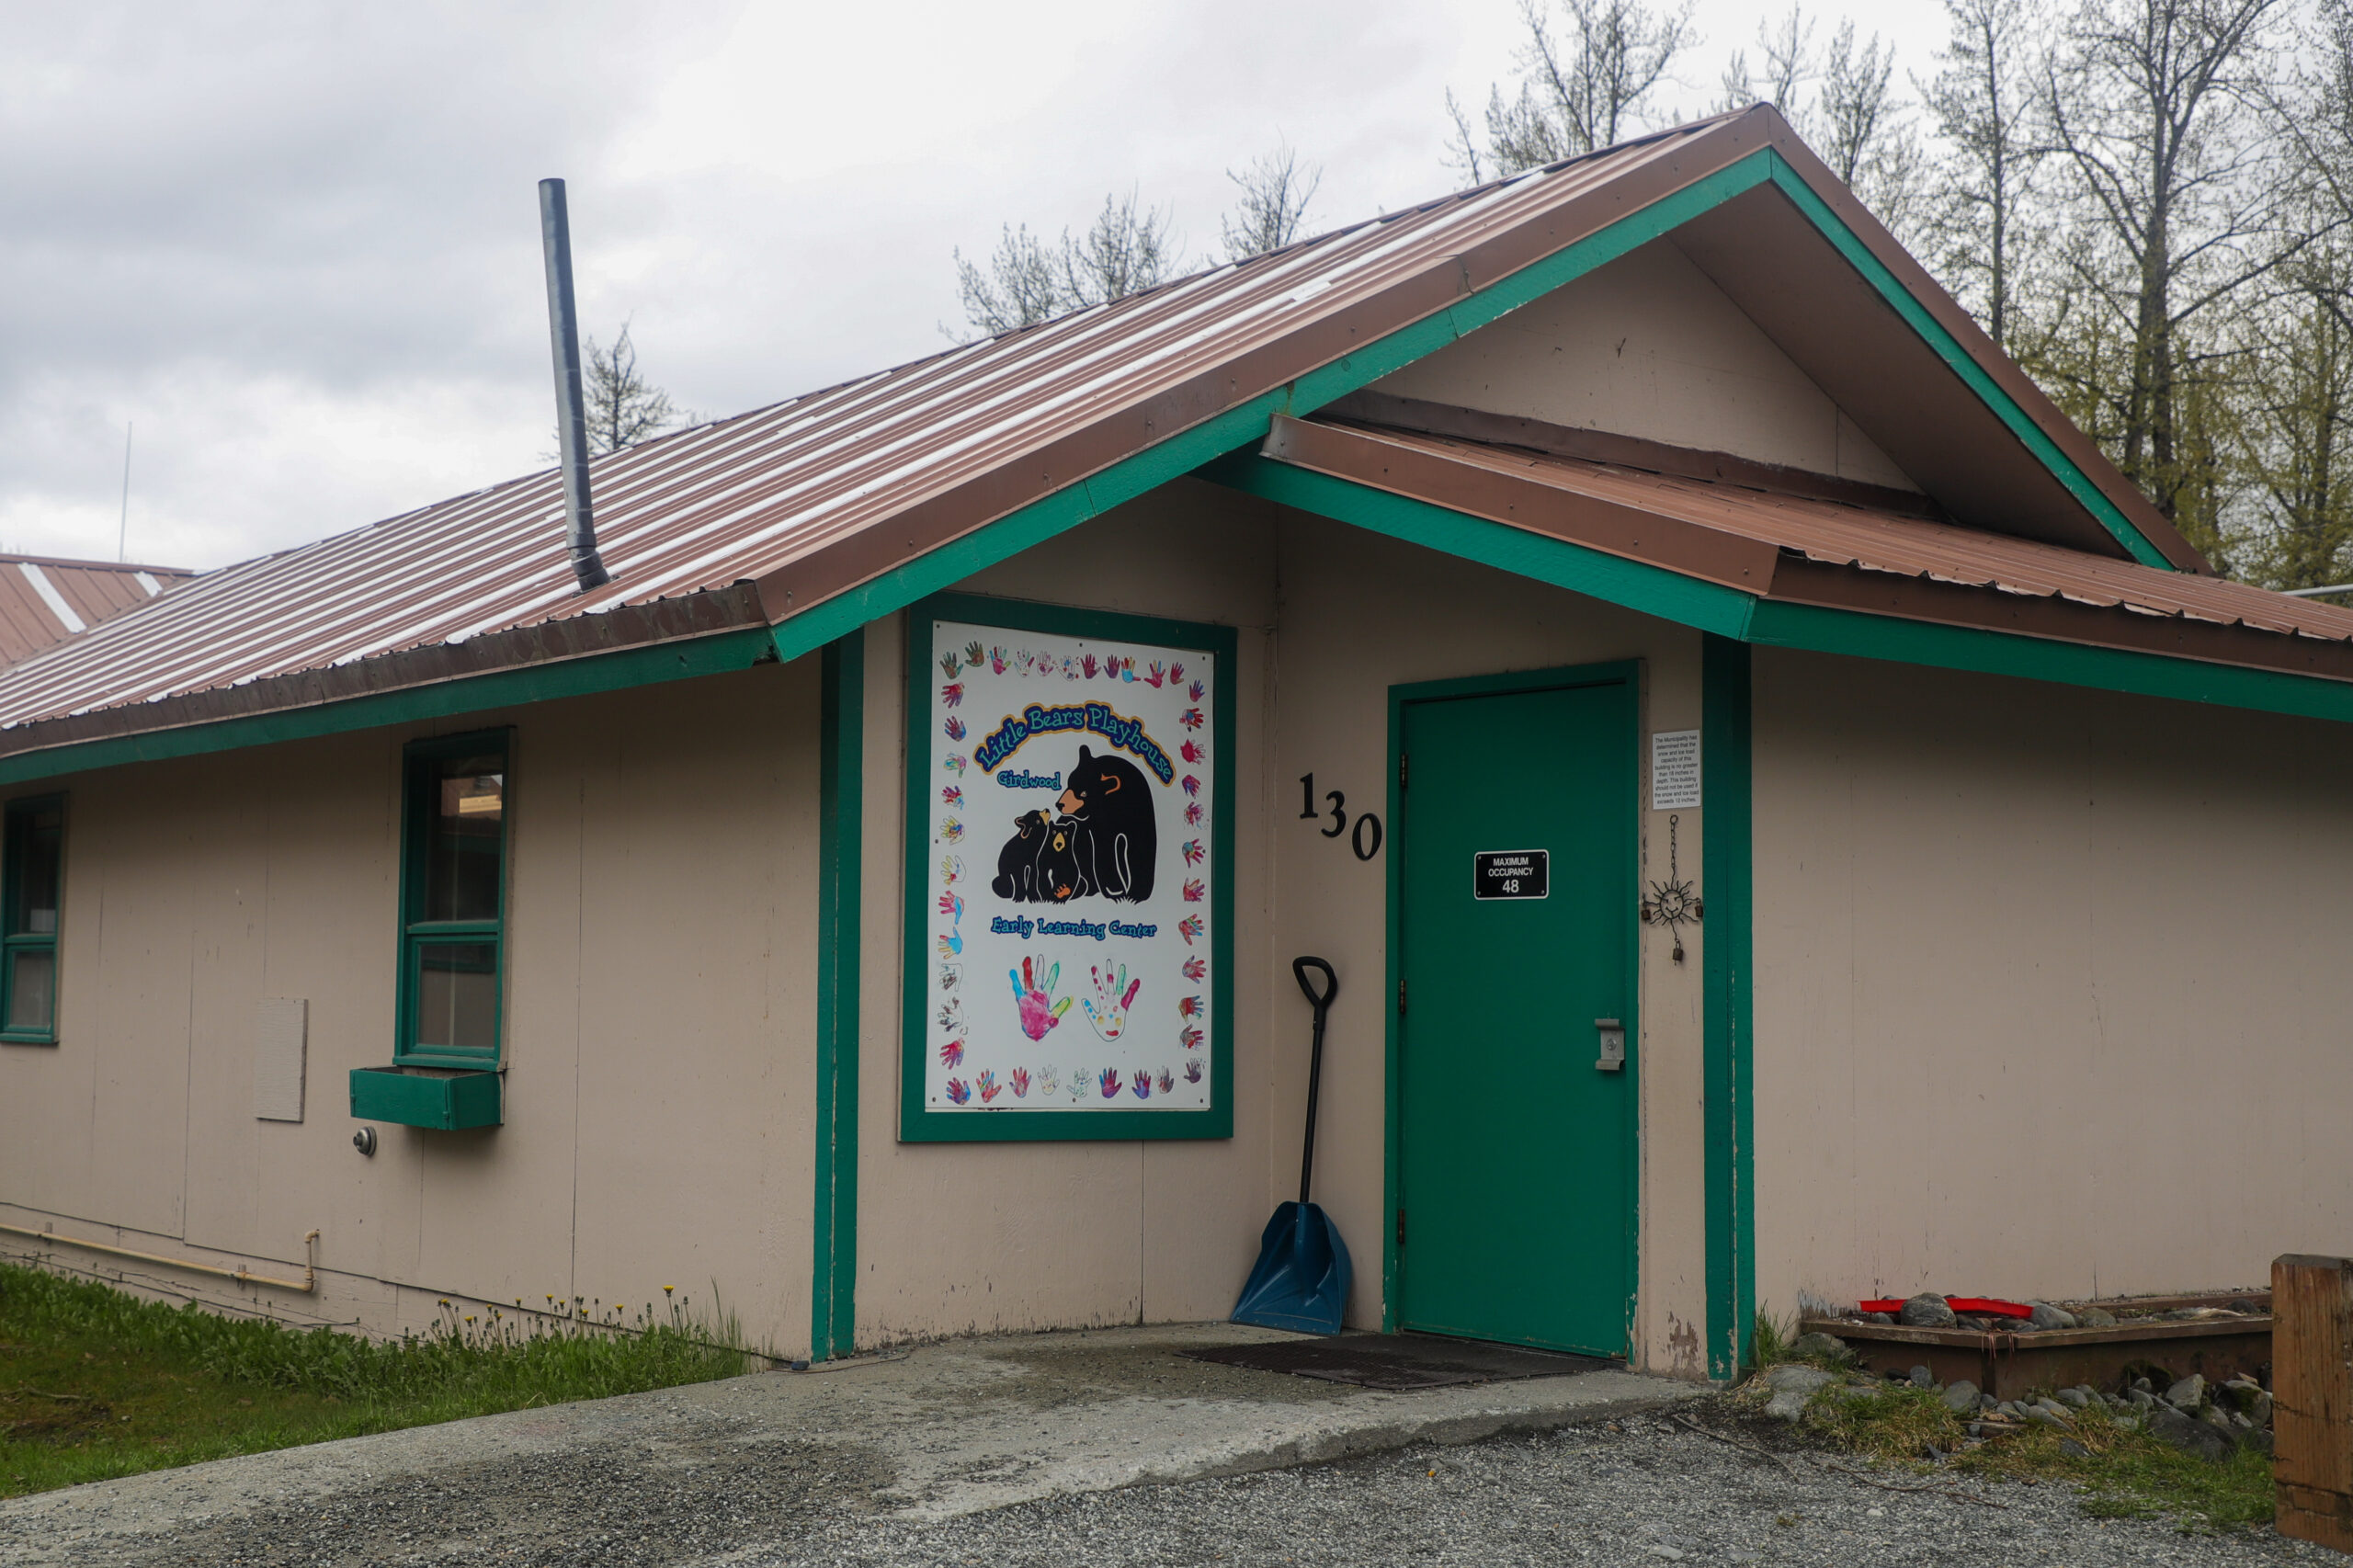 A brown building with a white and pink sign that says "Little Bears Playhouse, Girdwood, Early Learning Center."